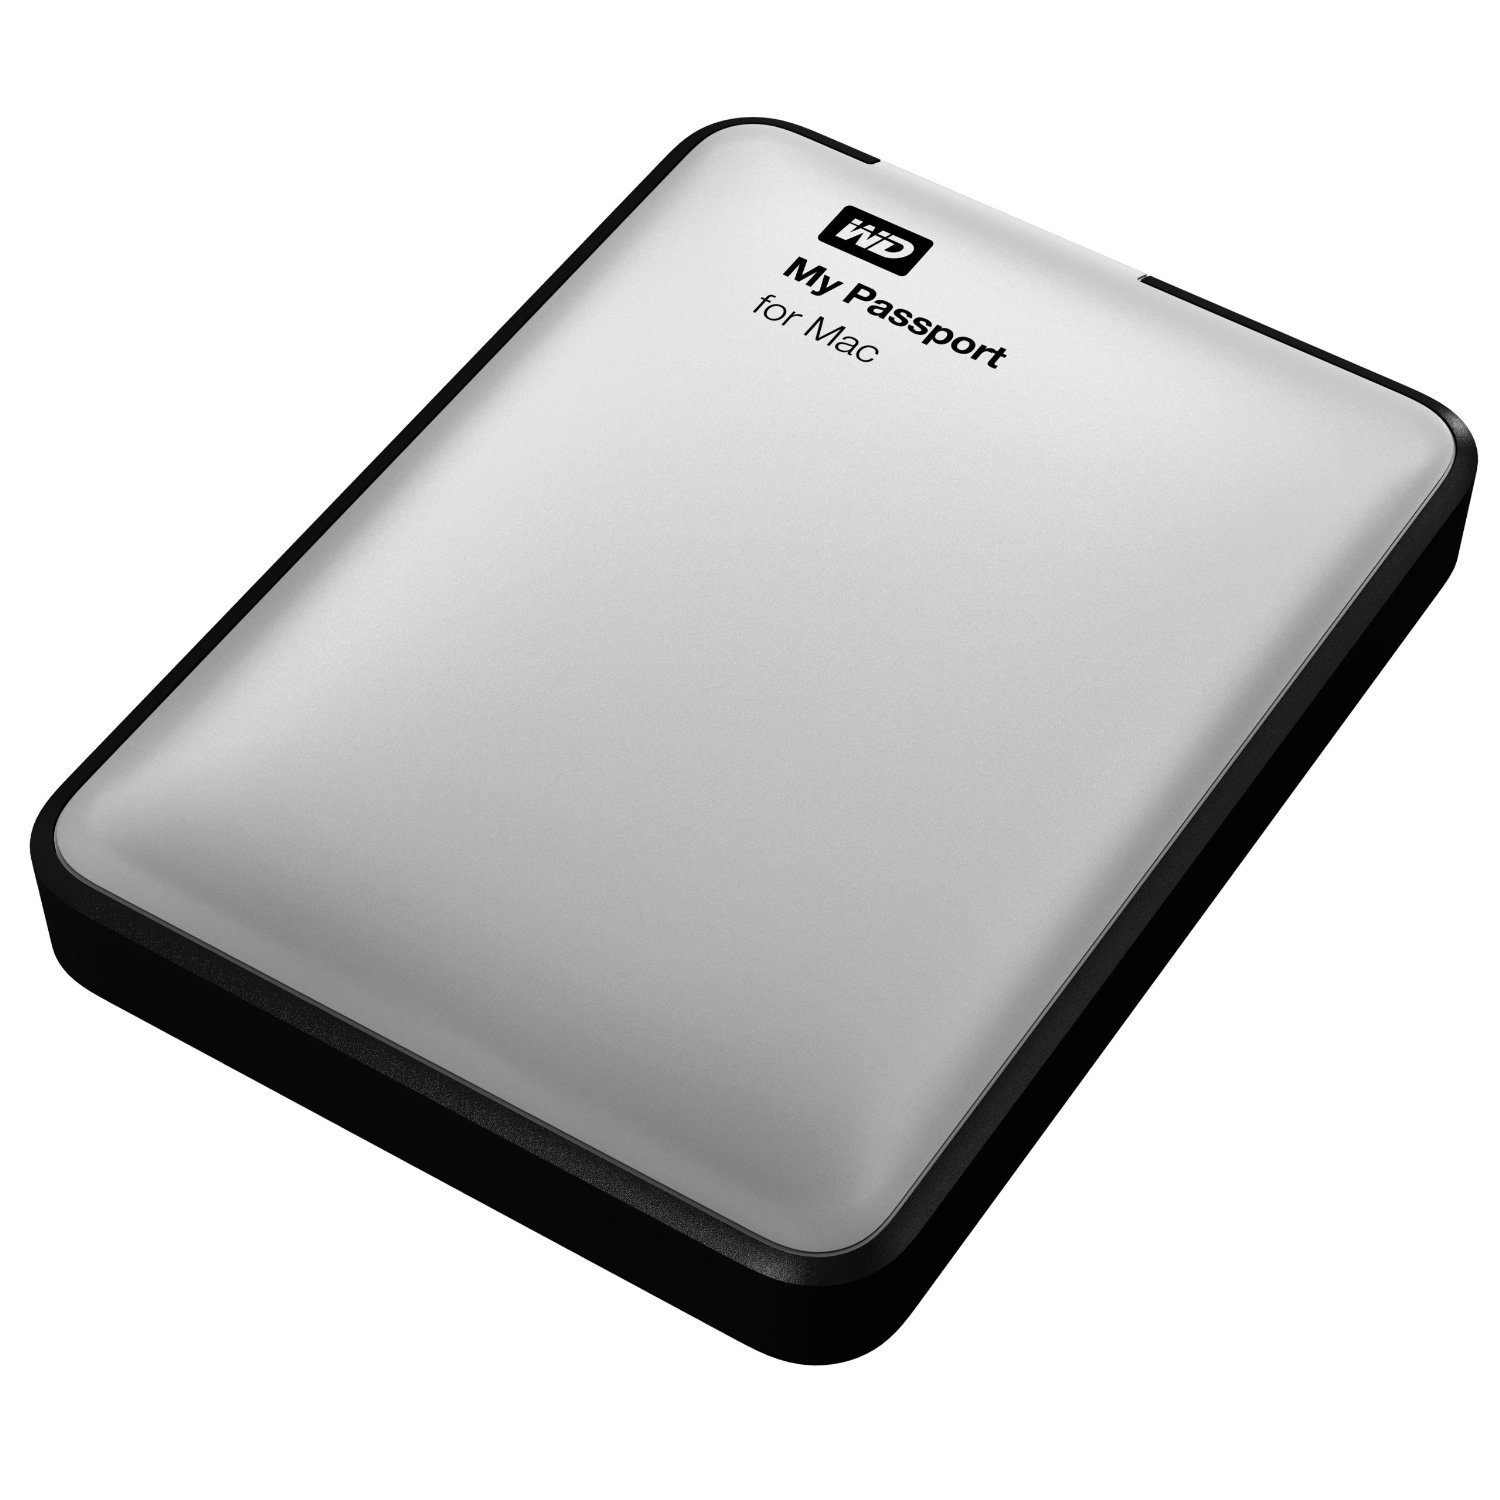 reformat wd hard drive for mac